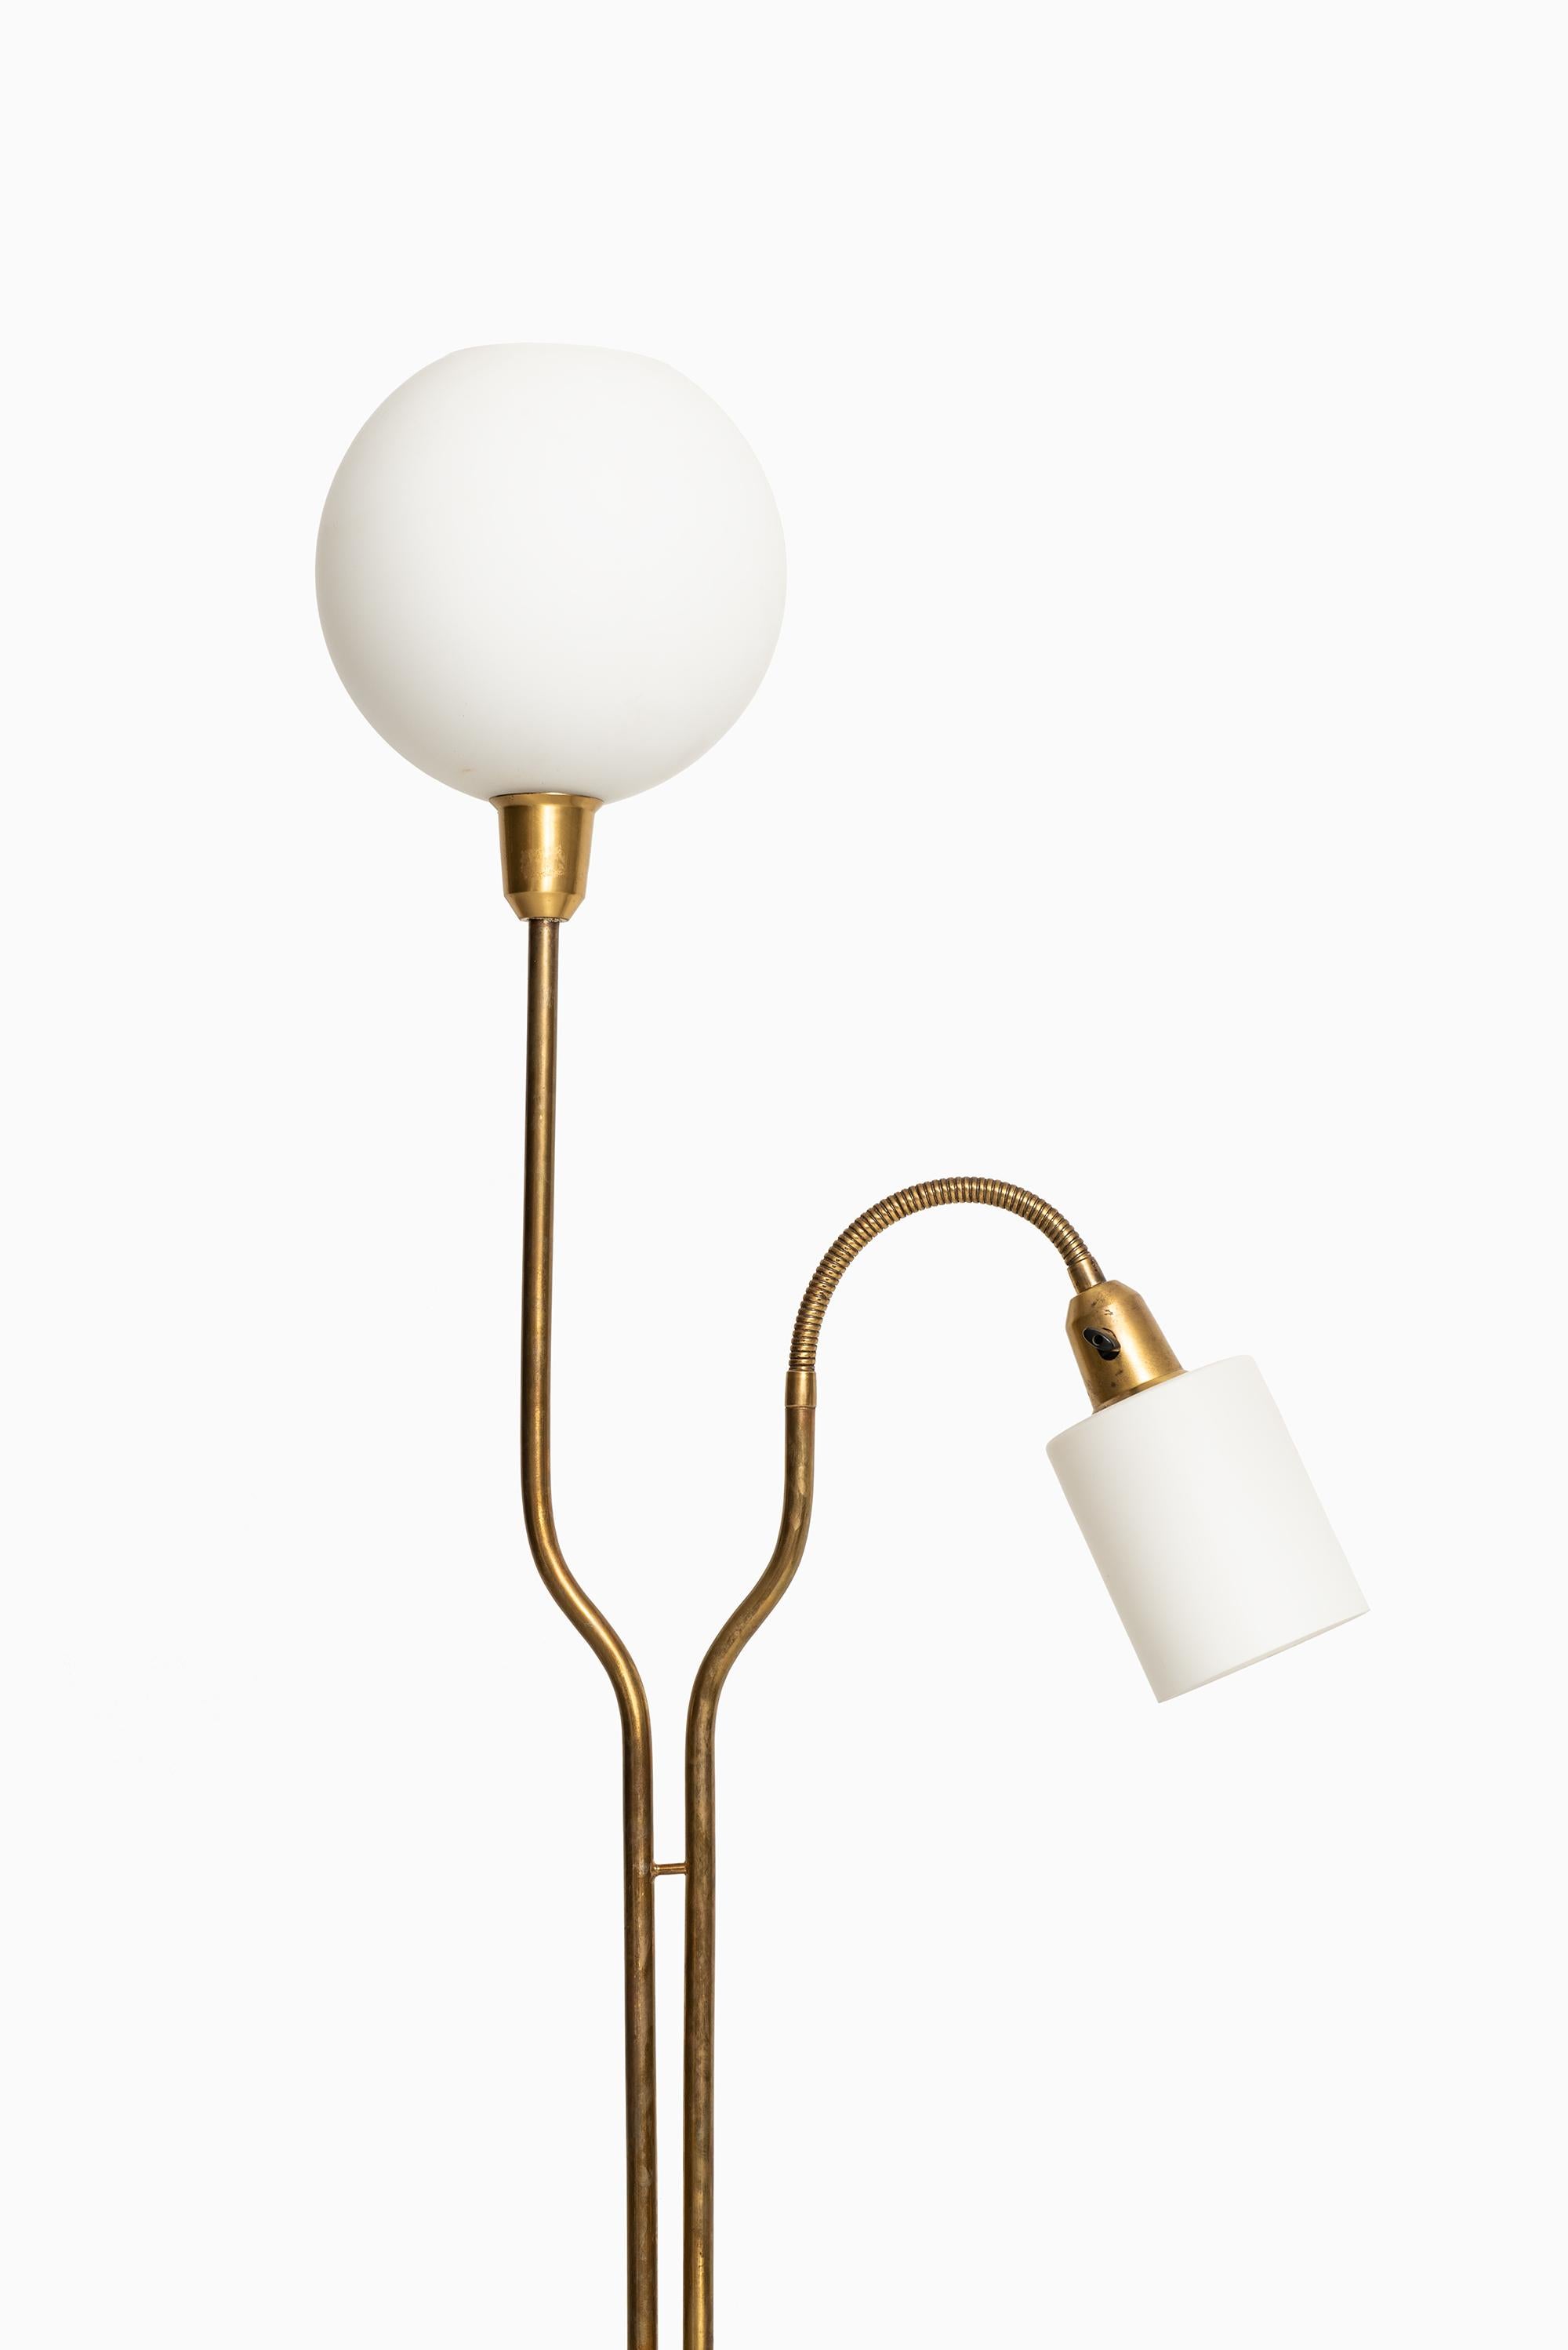 Rare floor lamp attributed to Hans Bergström. Produced by ASEA in Sweden.